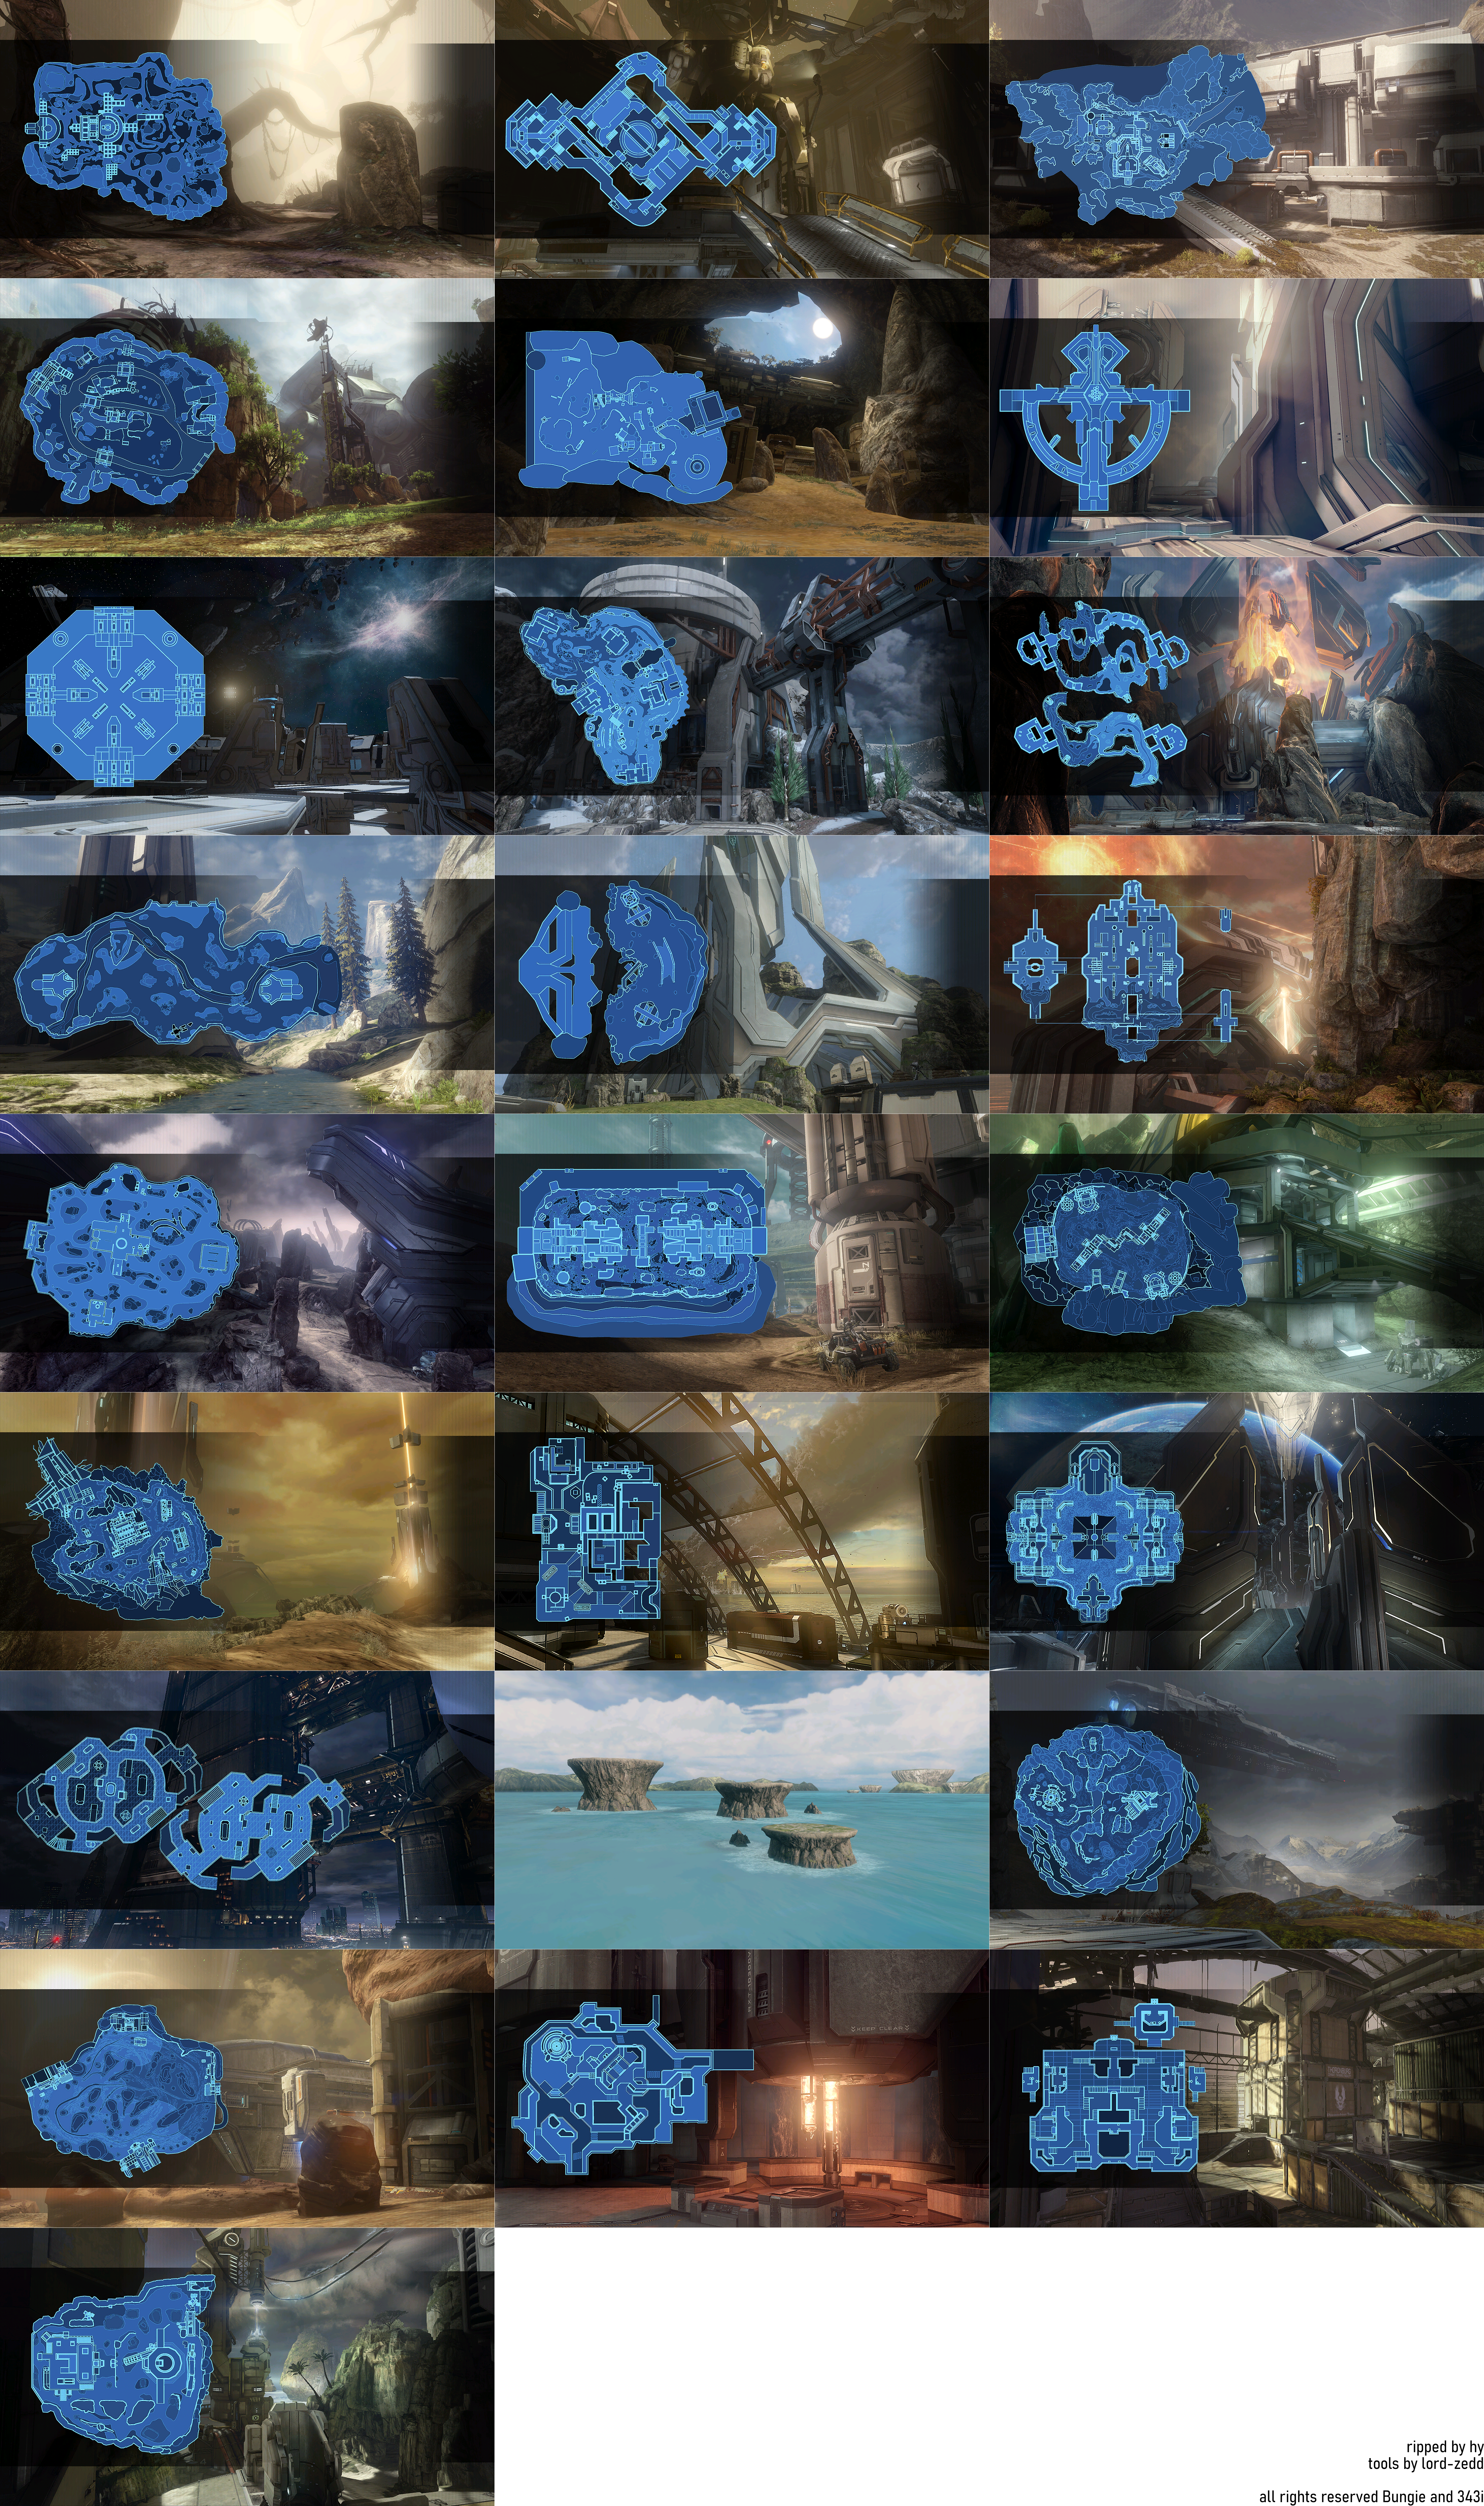 Halo: The Master Chief Collection - Halo 4 Multiplayer Level Loading Screens